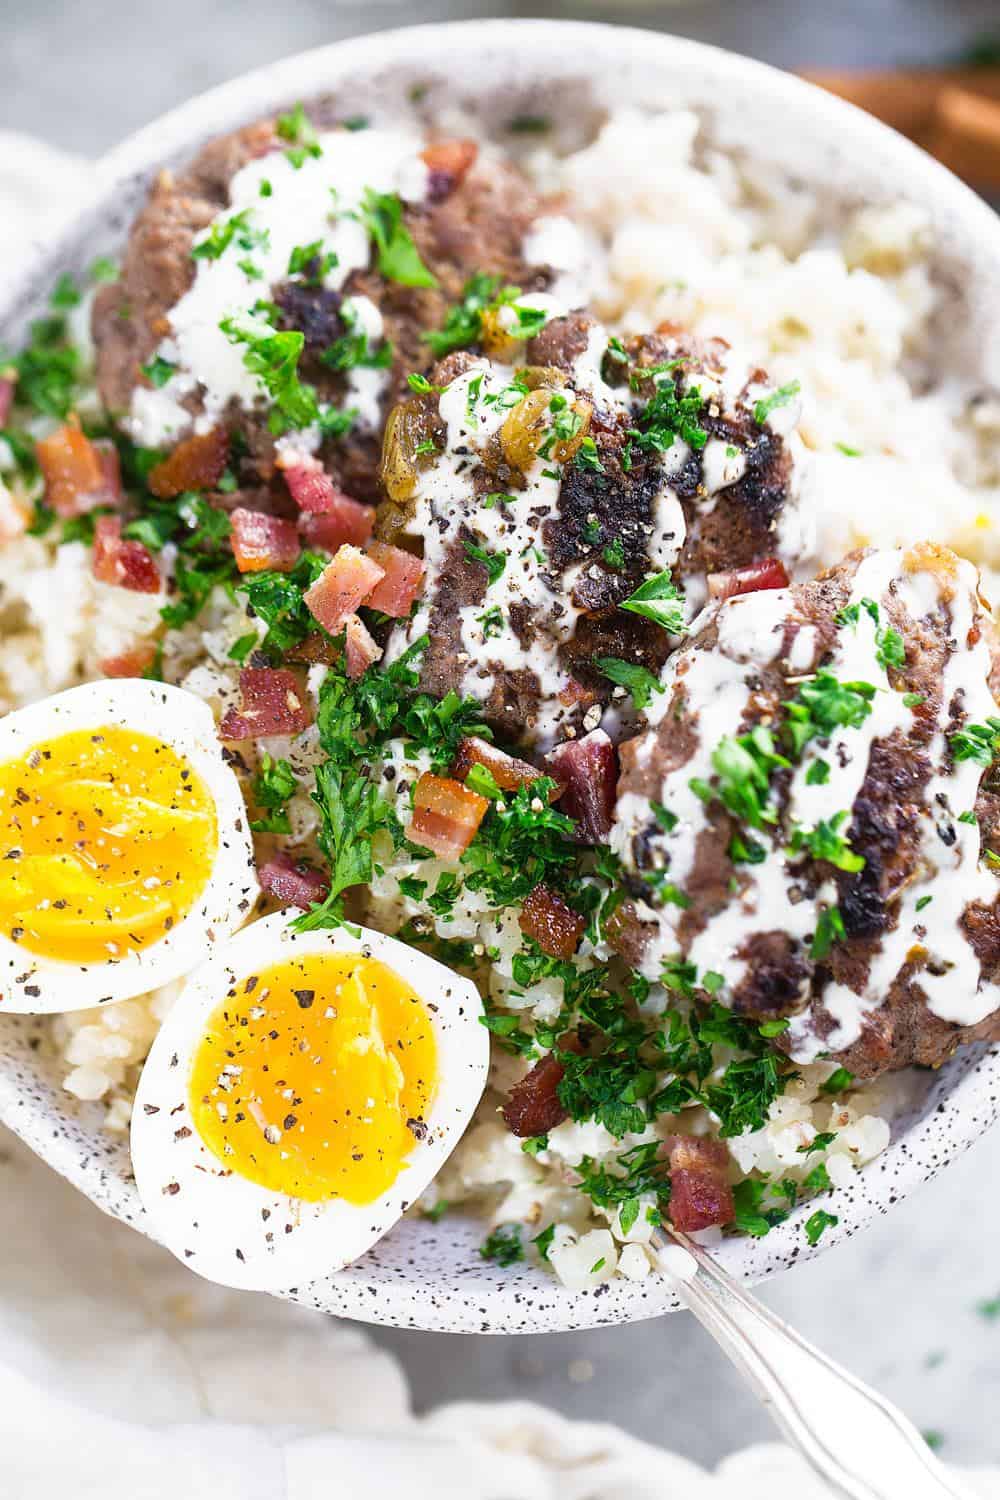 Beef and Bacon Breakfast Bowl garnished with sliced herbs